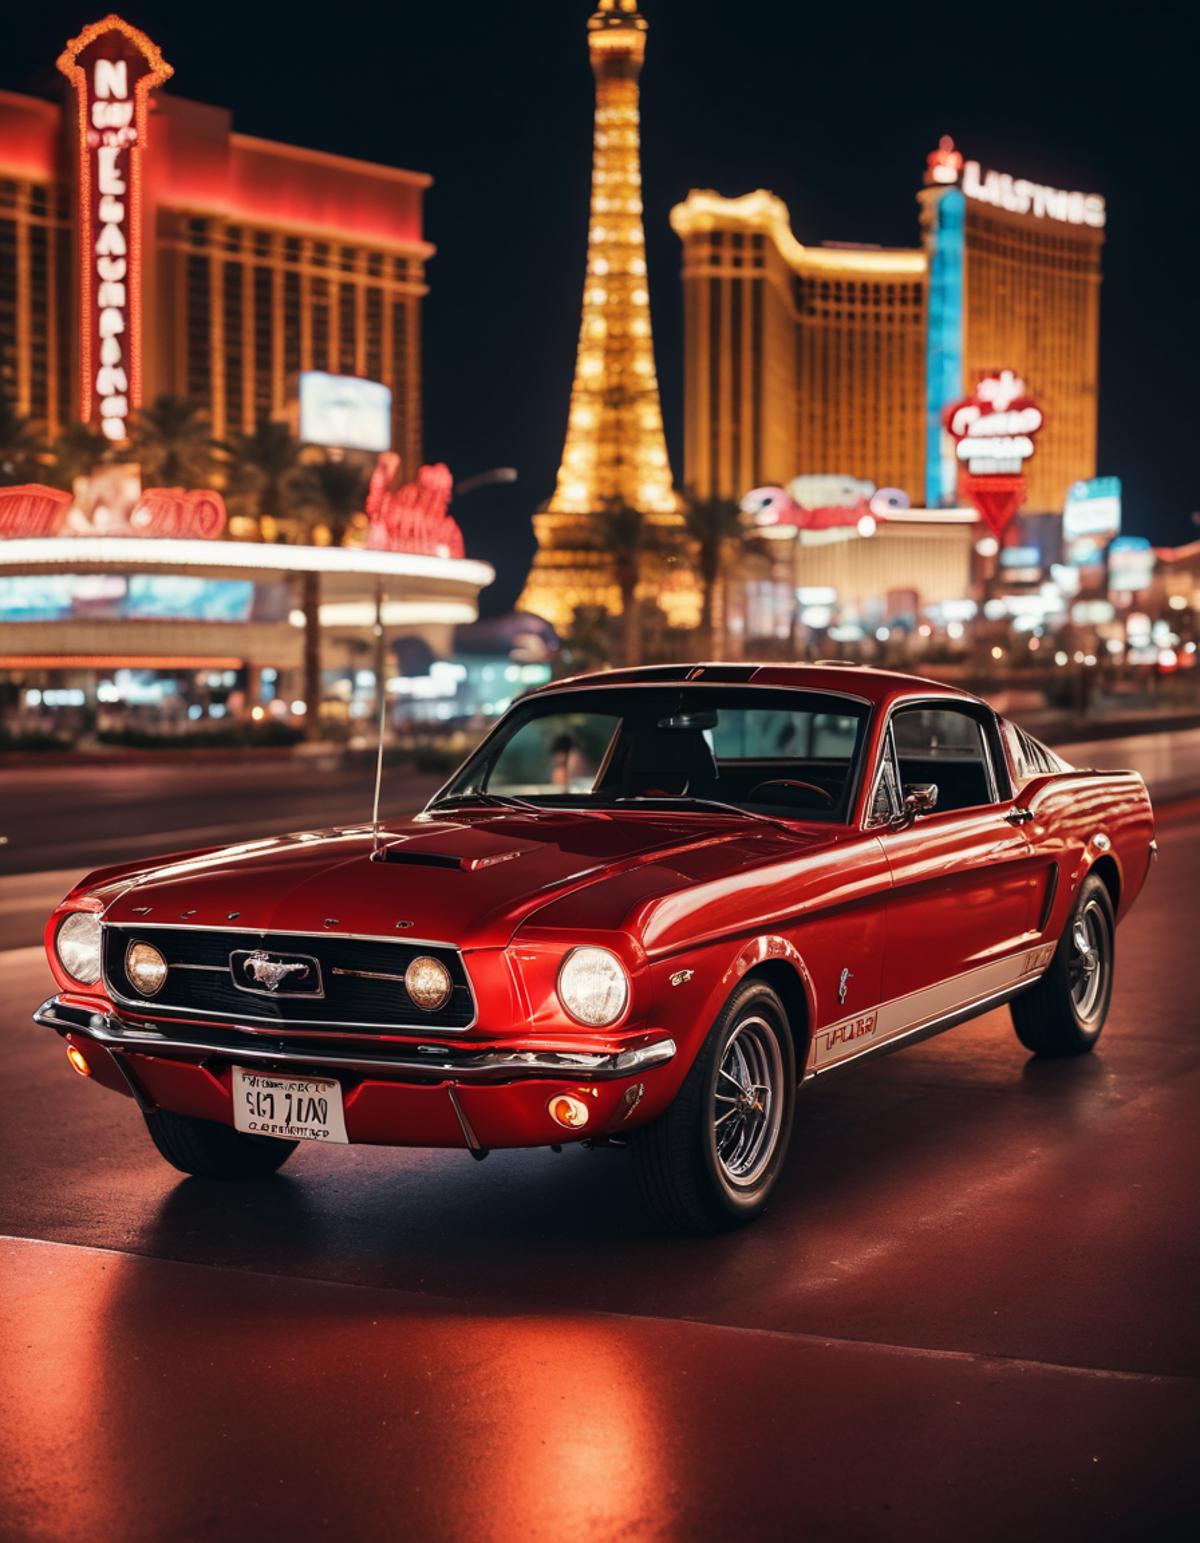 Red Mustang on a city street at night with a neon sign in the background.